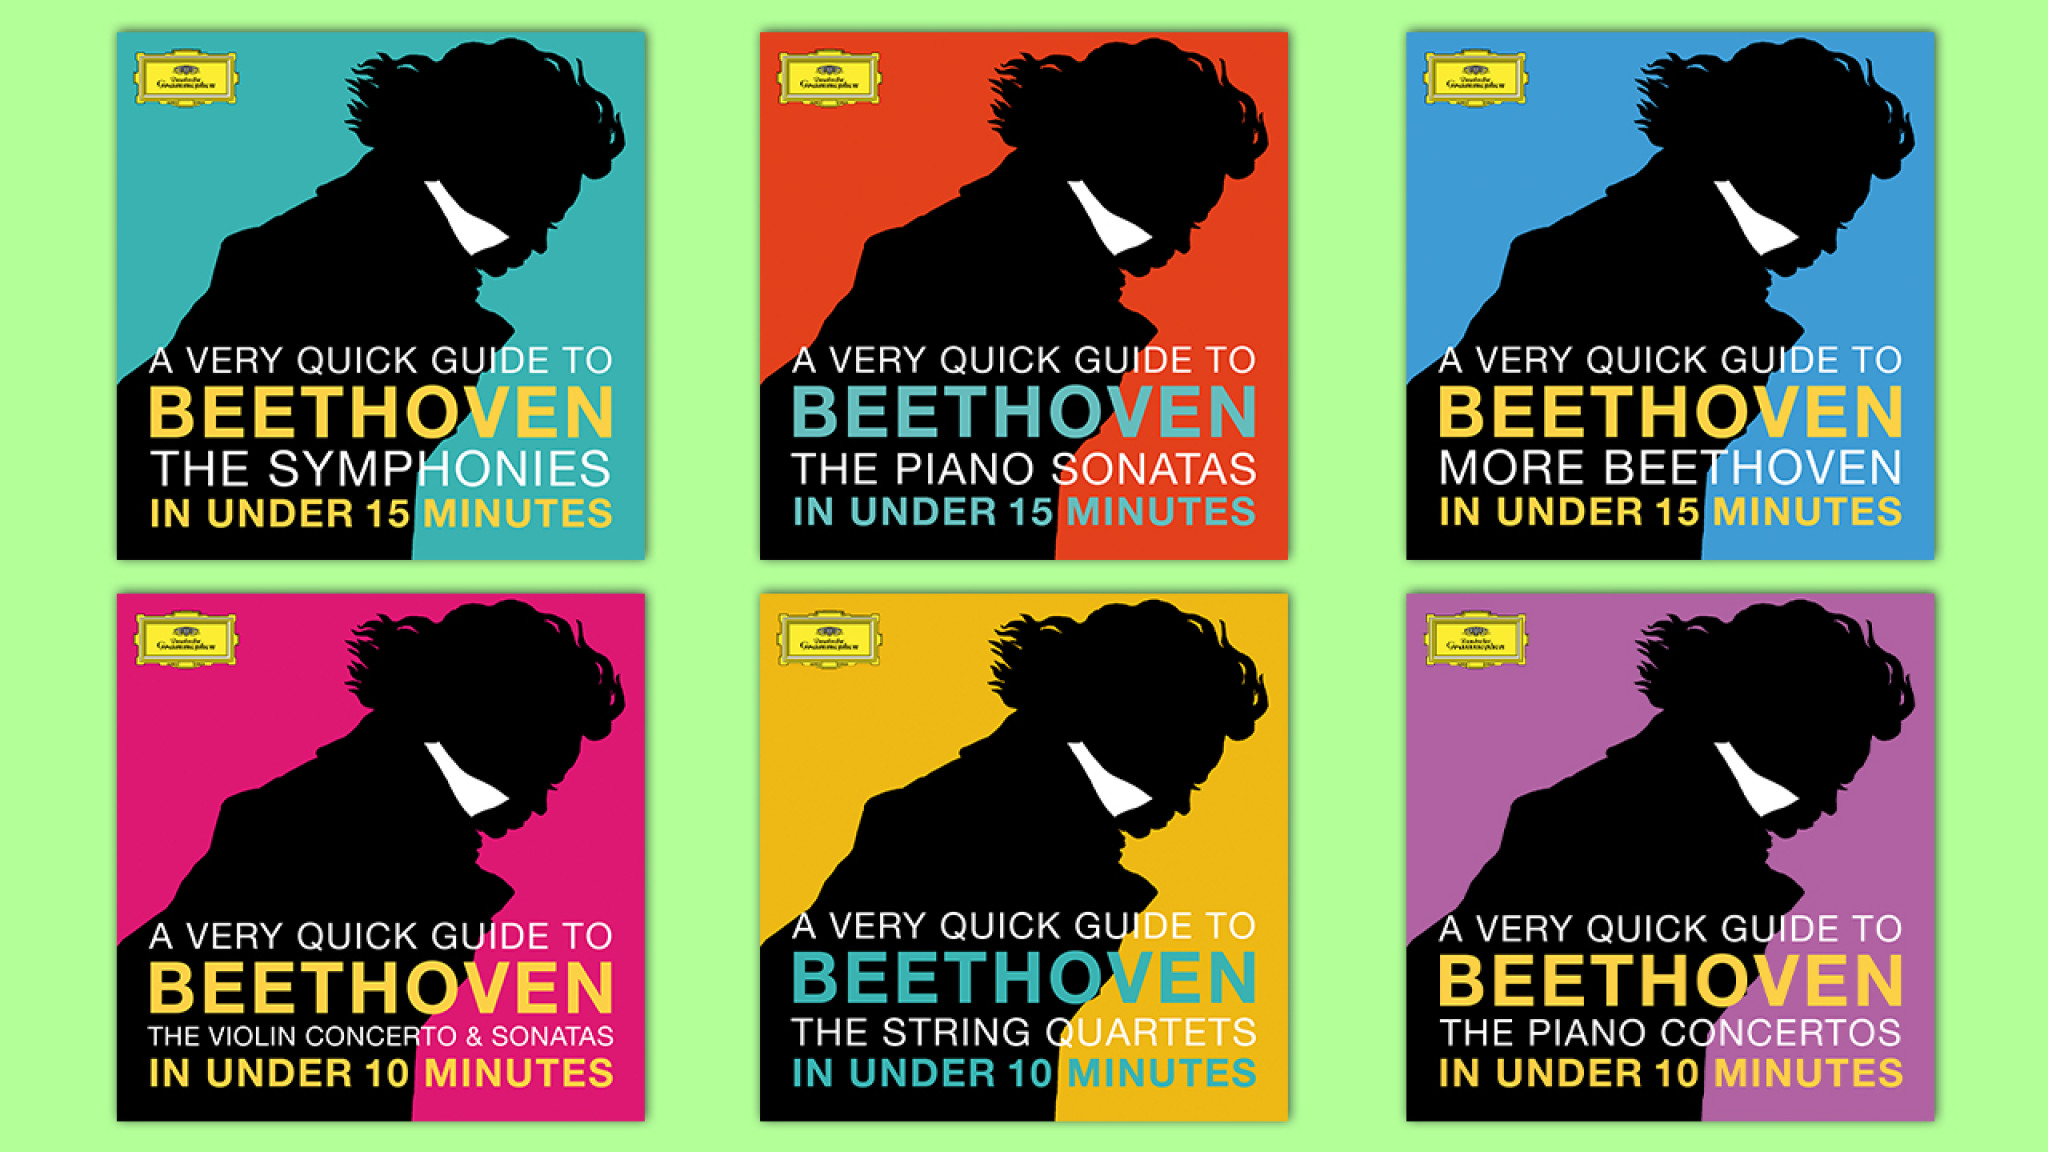 Beethoven in under 15 minutes – 6 releases